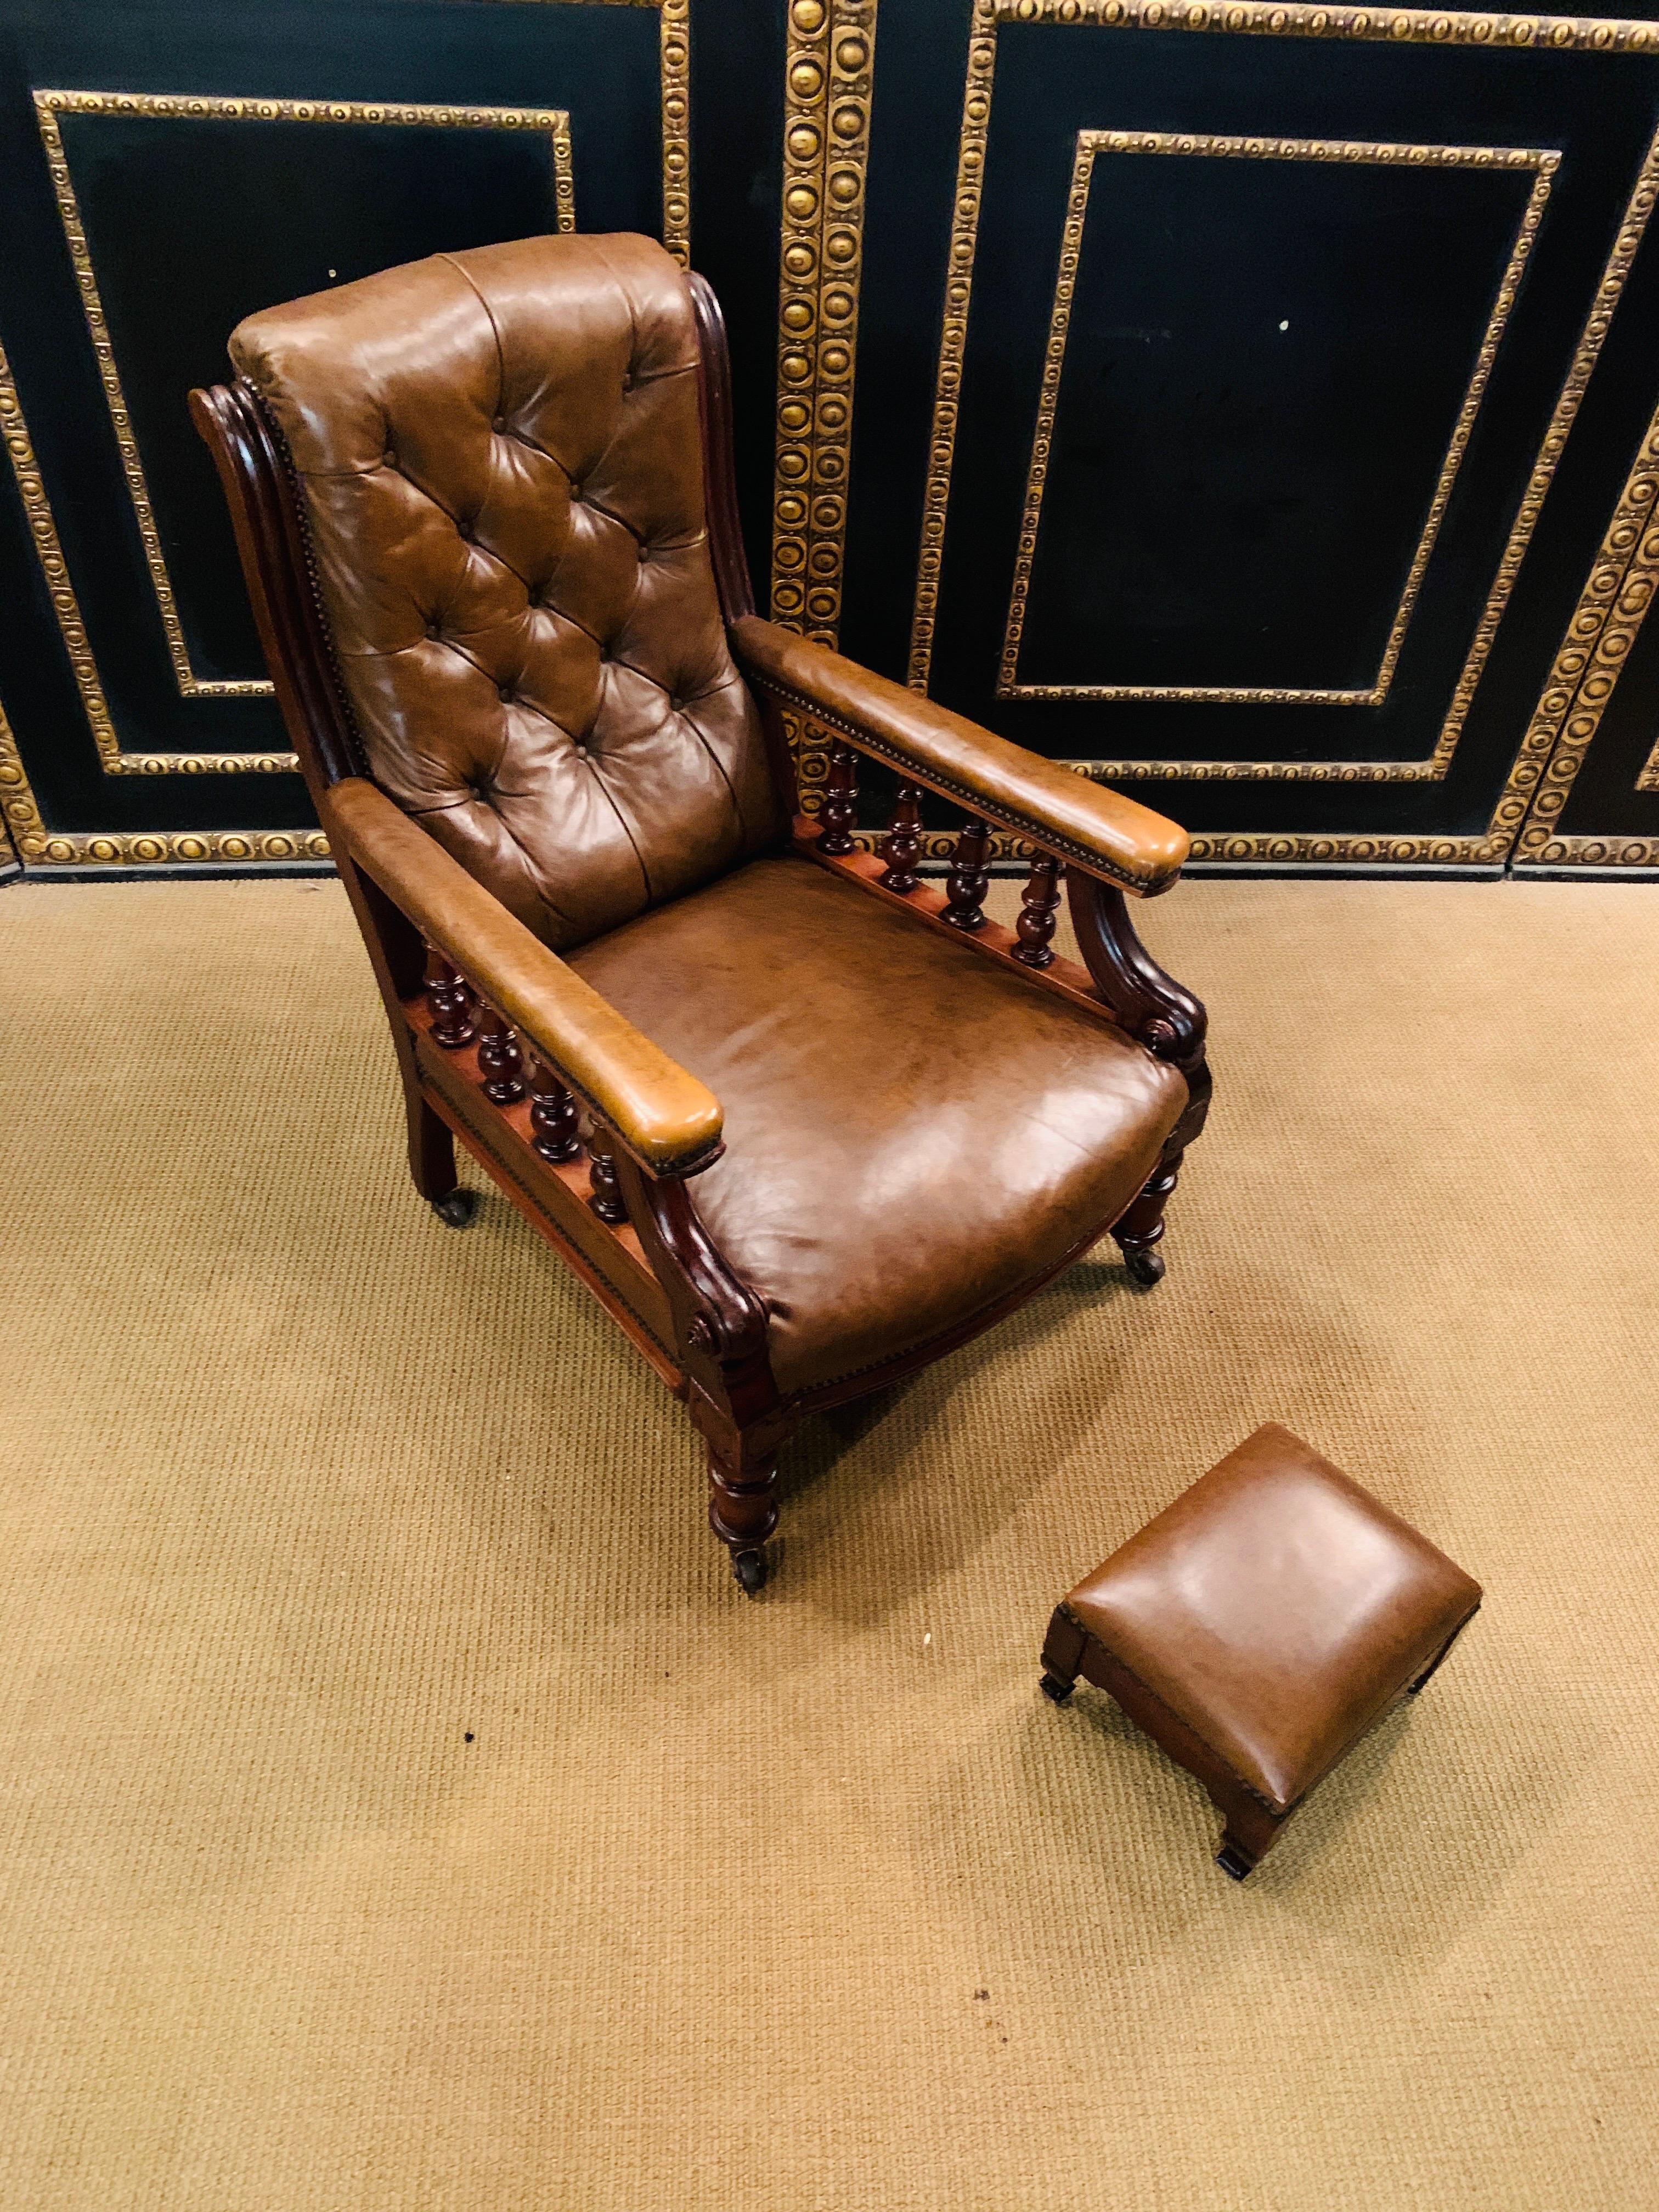 We are delighted to offer for sale this lovely Chesterfield Dutch hand dyed Cigar Brown leather library reading armchair with ottoman. A good looking and decorative pair, it has a lovely Victorian Gentleman’s club look and feel to it, the frames are